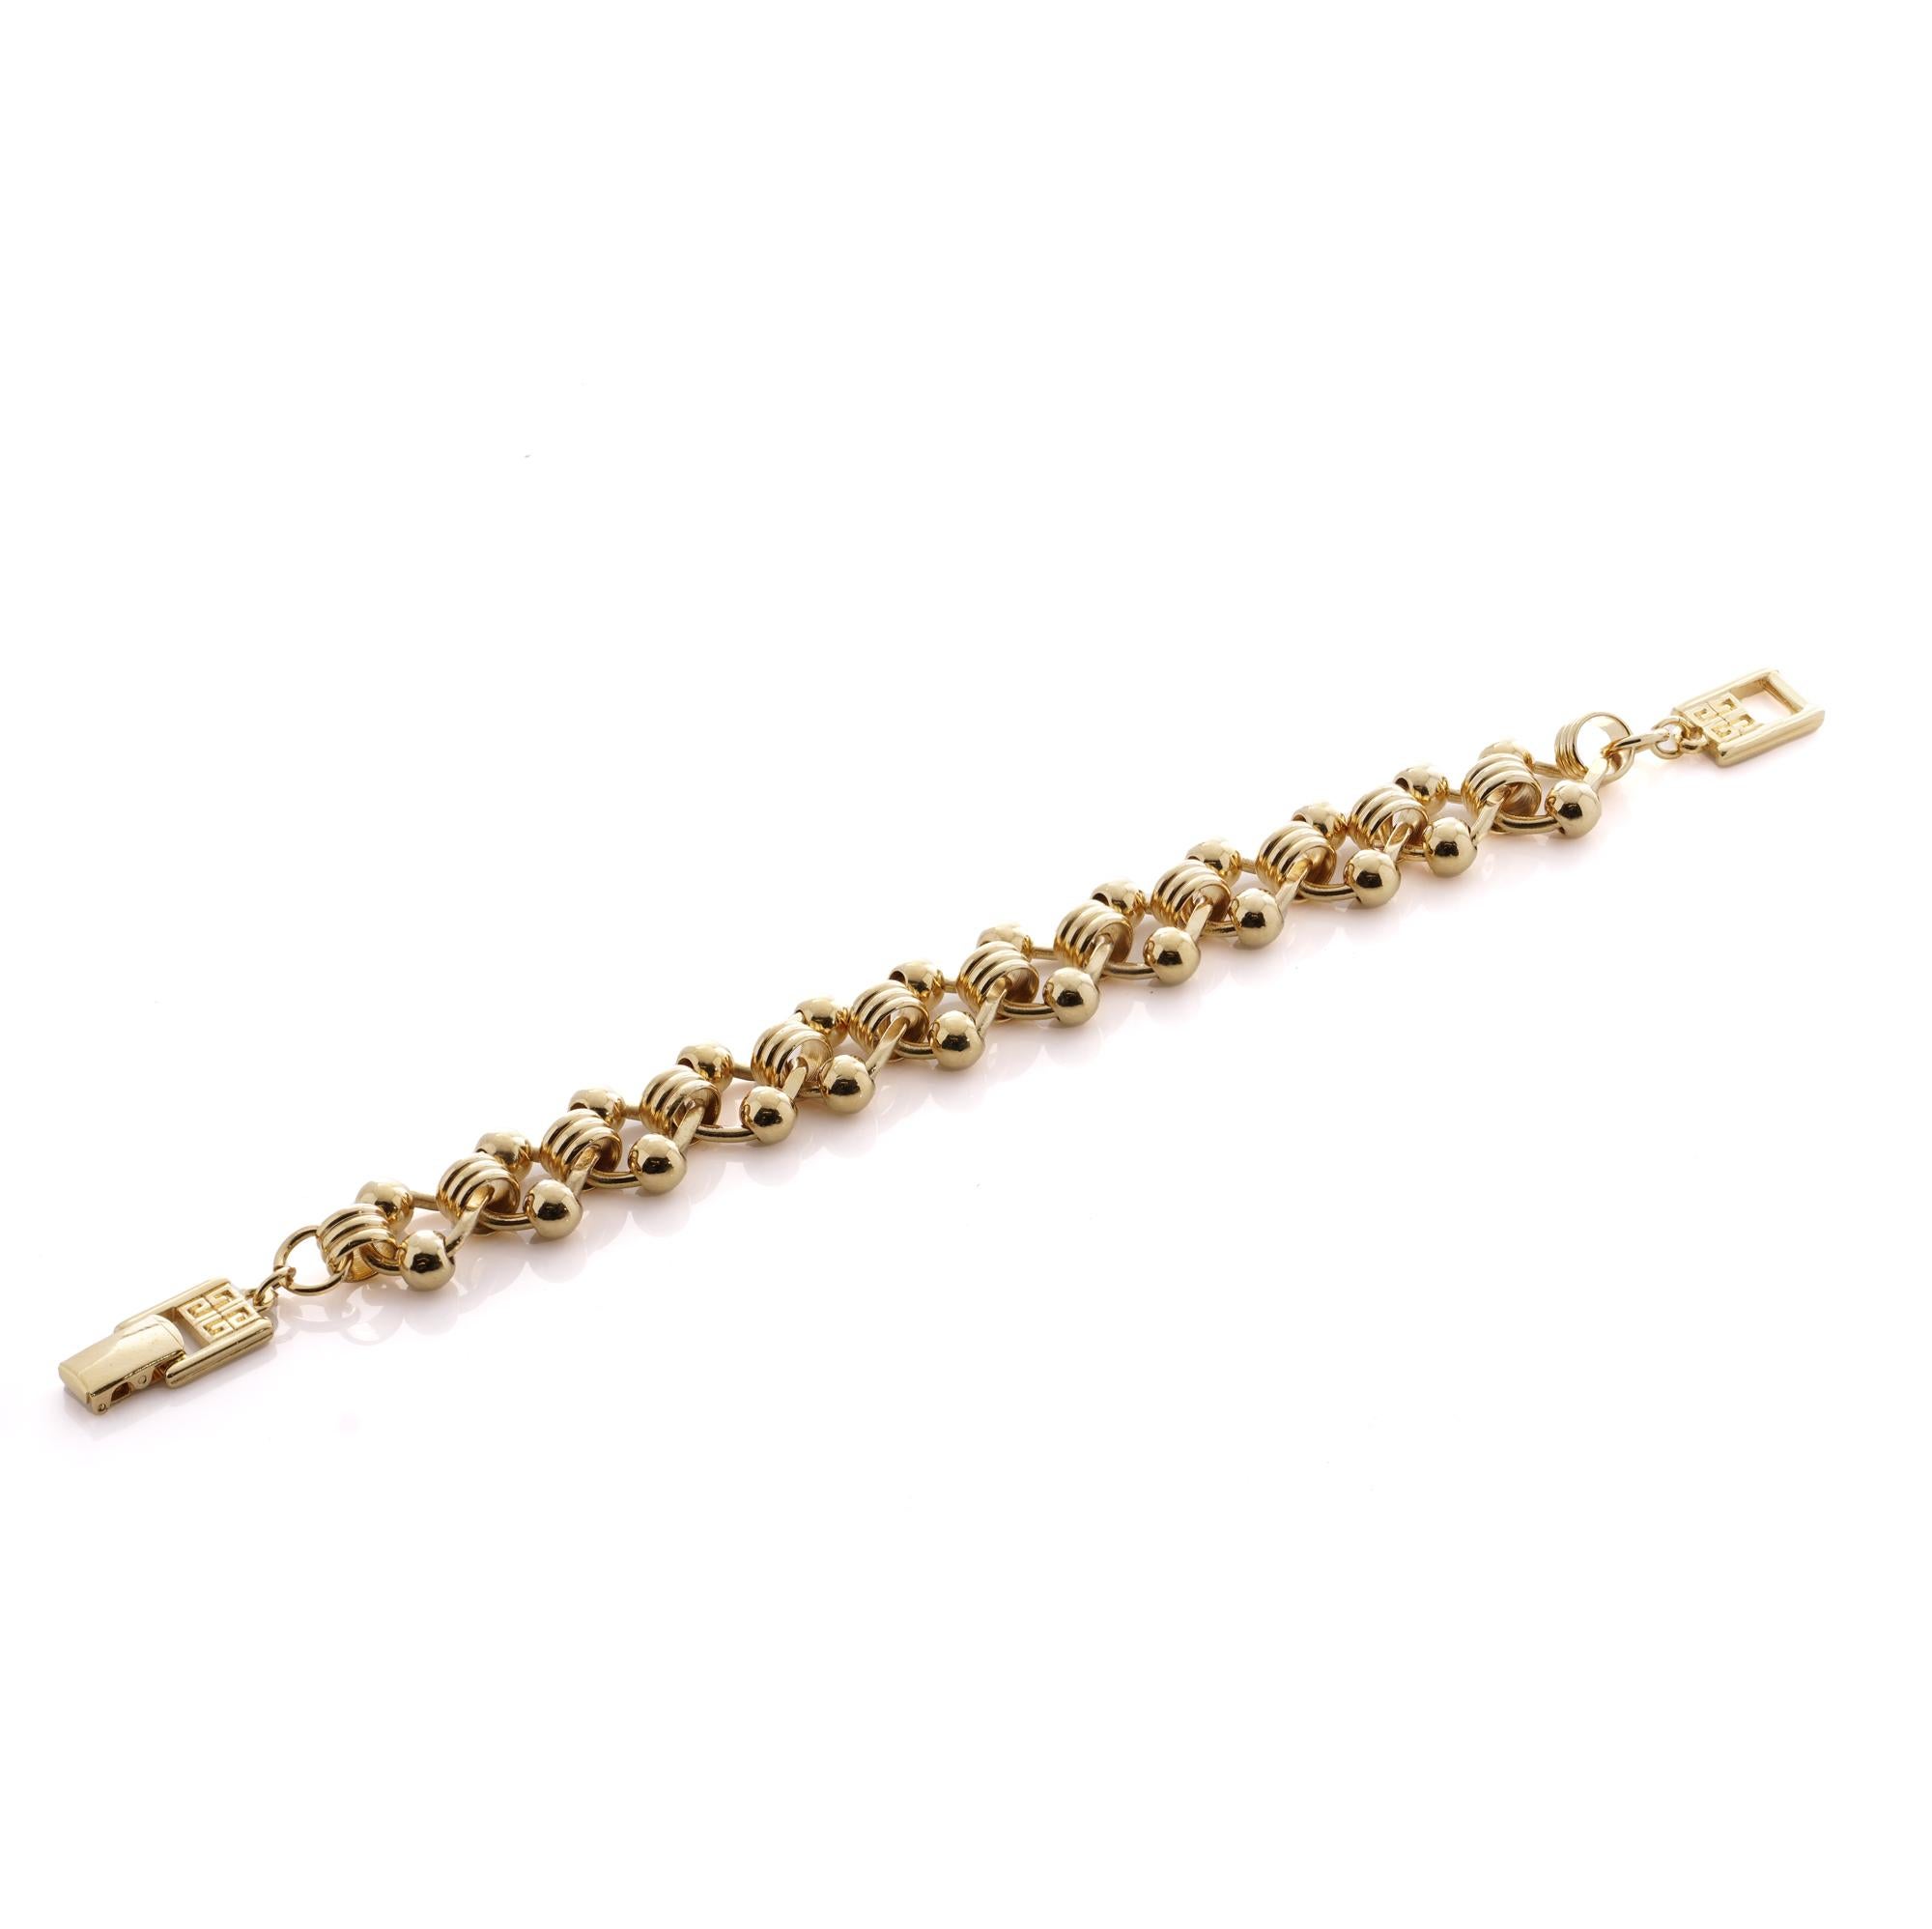 Introducing a timeless piece of elegance from the esteemed Givenchy house, the Vintage Gold Tone Link Bracelet, dating back to the Circa 1990s. Crafted with meticulous attention to detail, this bracelet exudes sophistication and style.

Weighing a